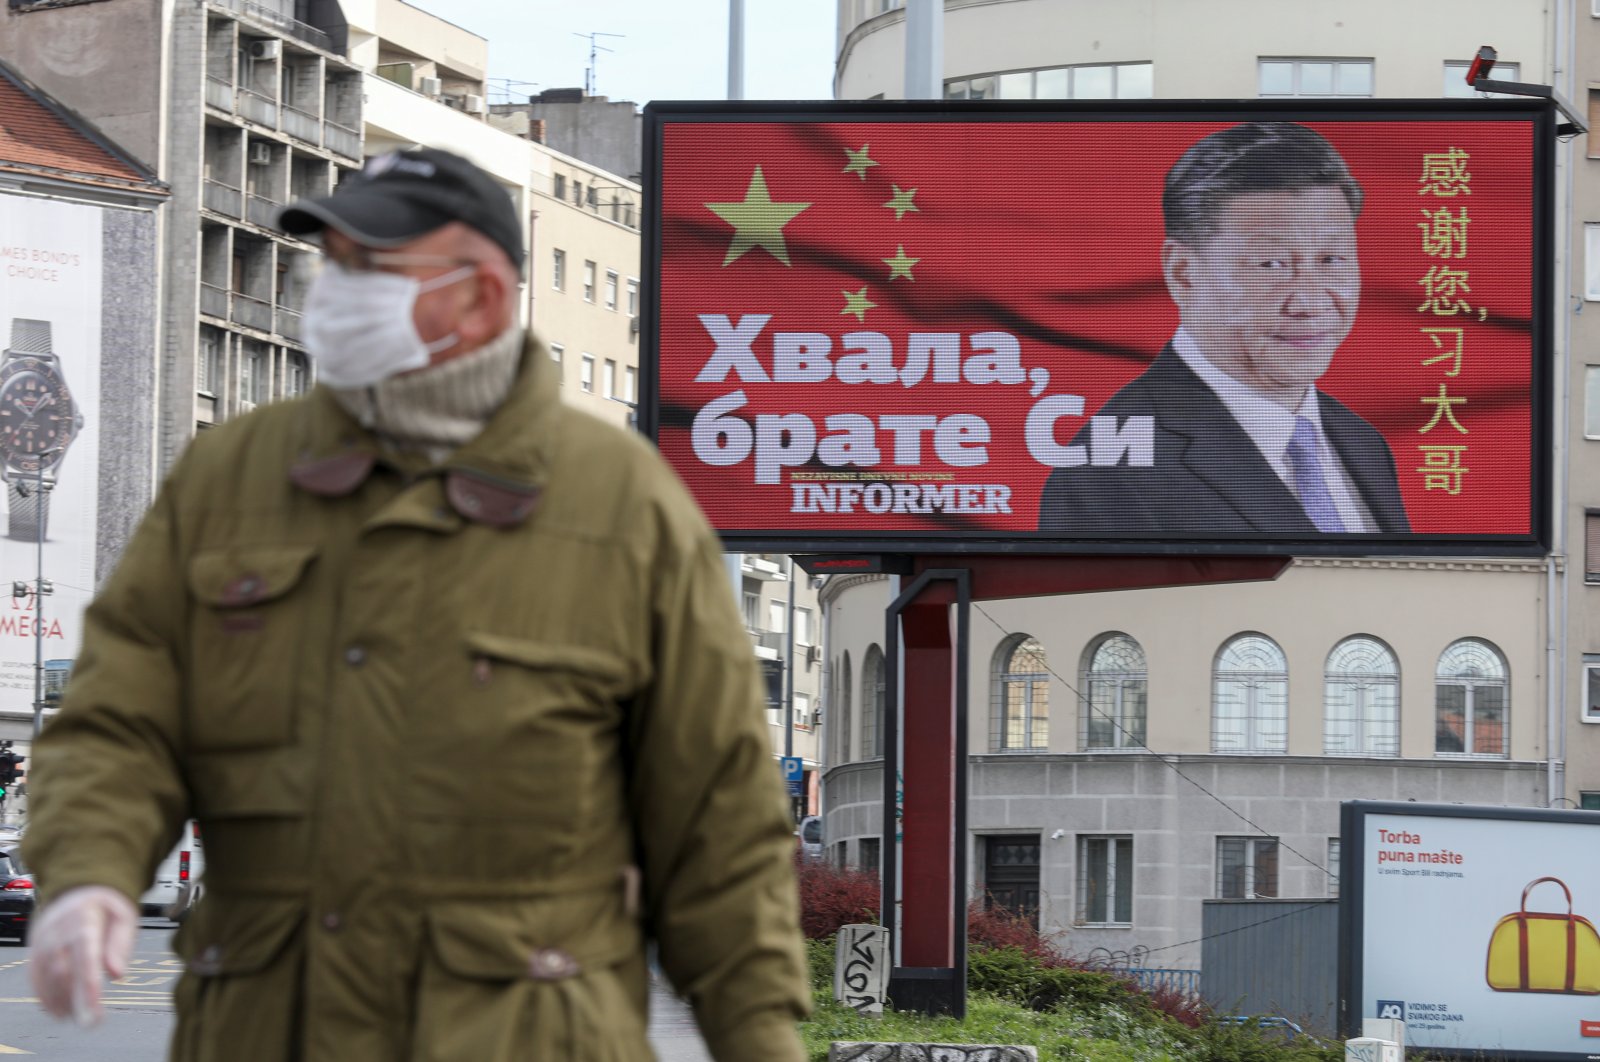 A man wearing a protective mask passes by a billboard depicting Chinese President Xi Jinping that reads "Thanks, brother Xi" amid COVID-19 pandemic, in Belgrade, Serbia, April 1, 2020. (Reuters Photo)